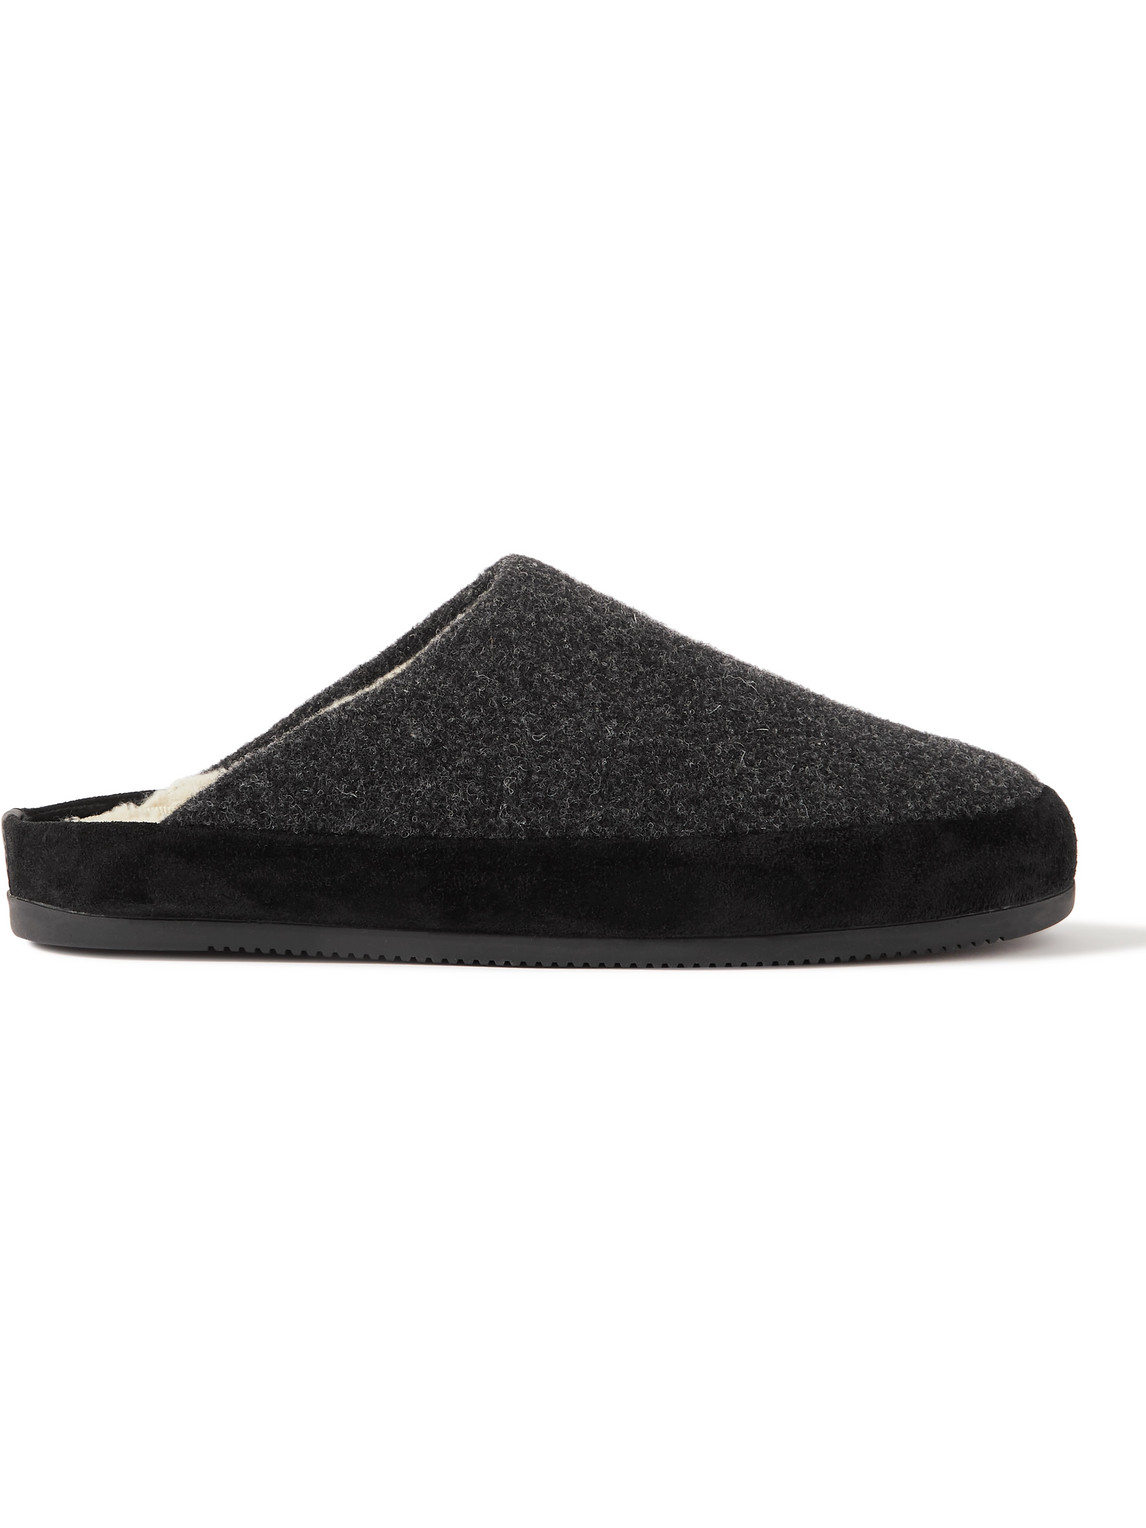 Mulo - Suede-Trimmed Shearling-Lined Recycled-Wool Slippers - Men - Gray - UK 12 von Mulo